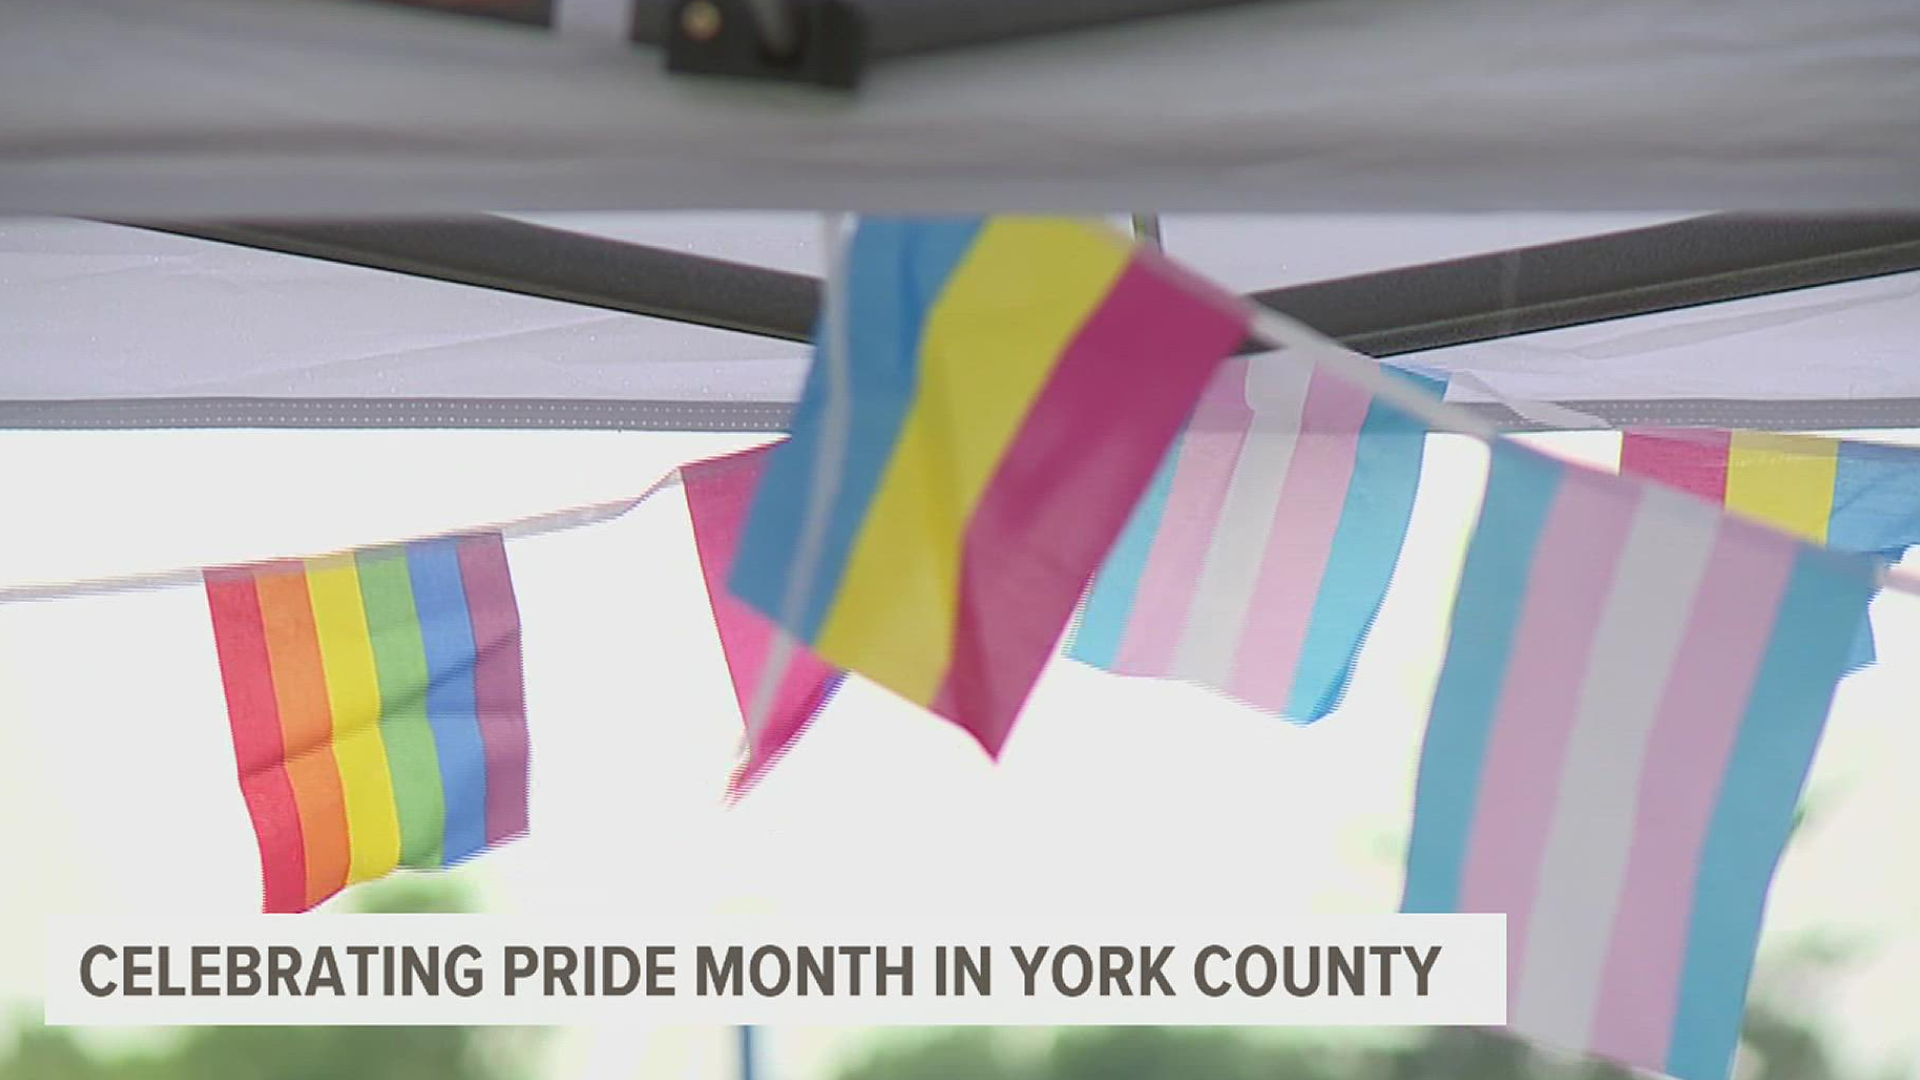 York County Pride, formerly known as Equality Fest, took place on June 11.